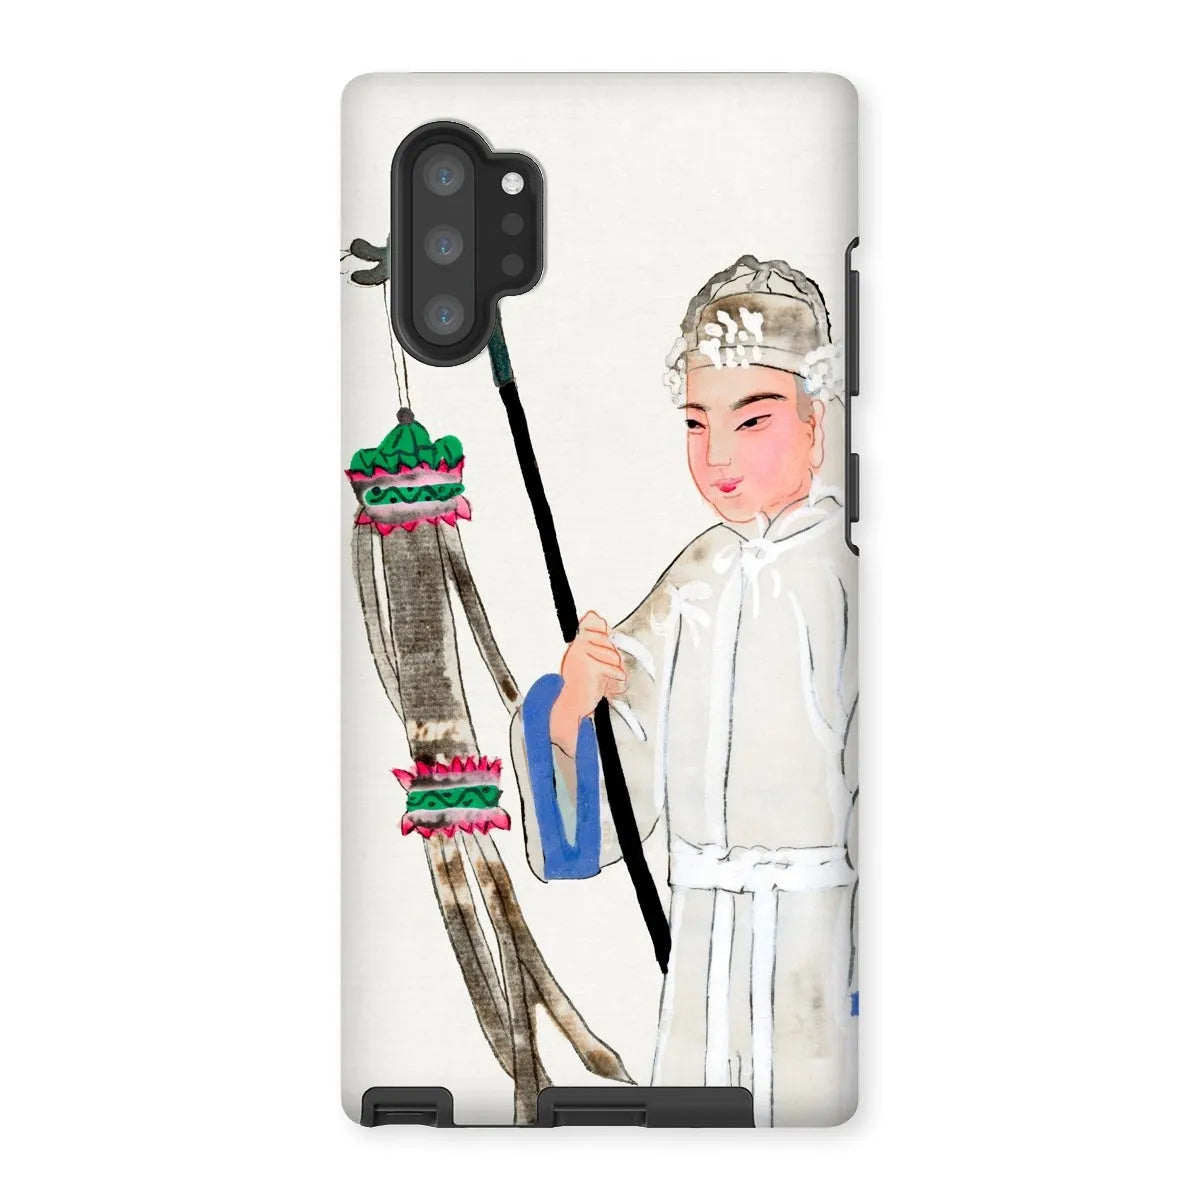 Man In Mourning - Chinese Historical Art Phone Case - Samsung Galaxy Note 10p / Matte - Mobile Phone Cases - Aesthetic